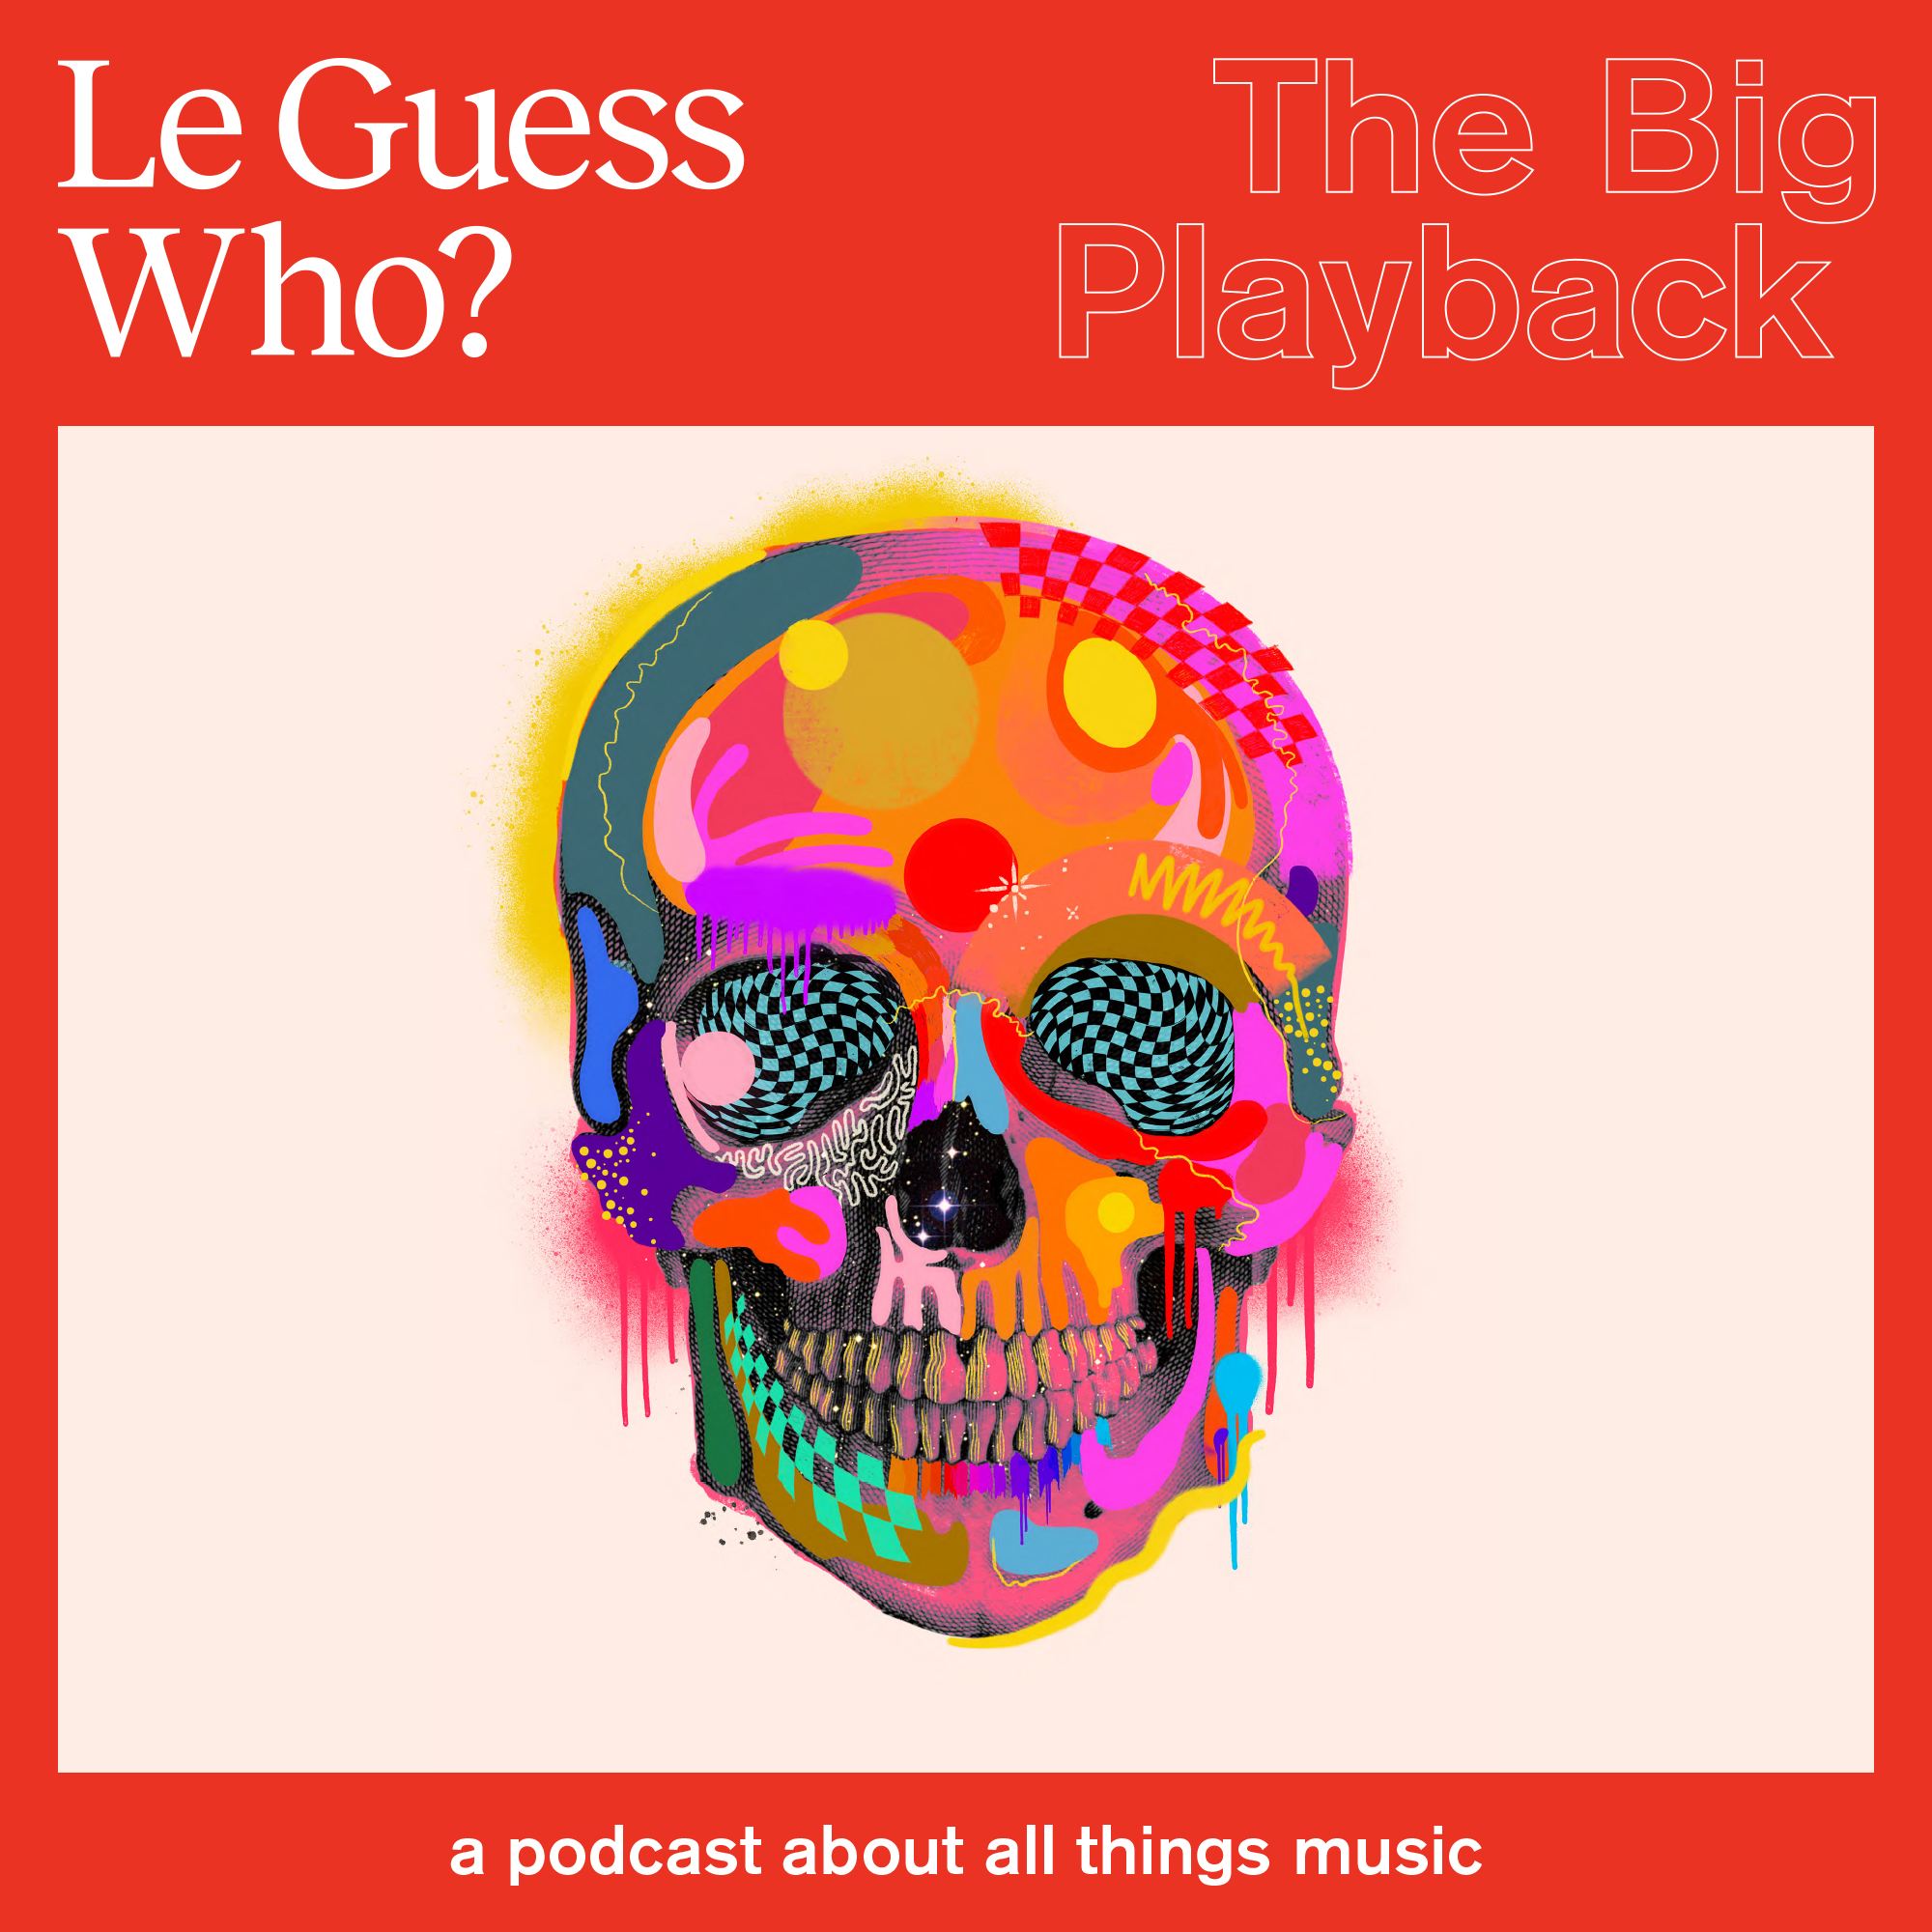 Podcast: listen to episode 2 of 'The Big Playback' about the relationship between Art and Identity